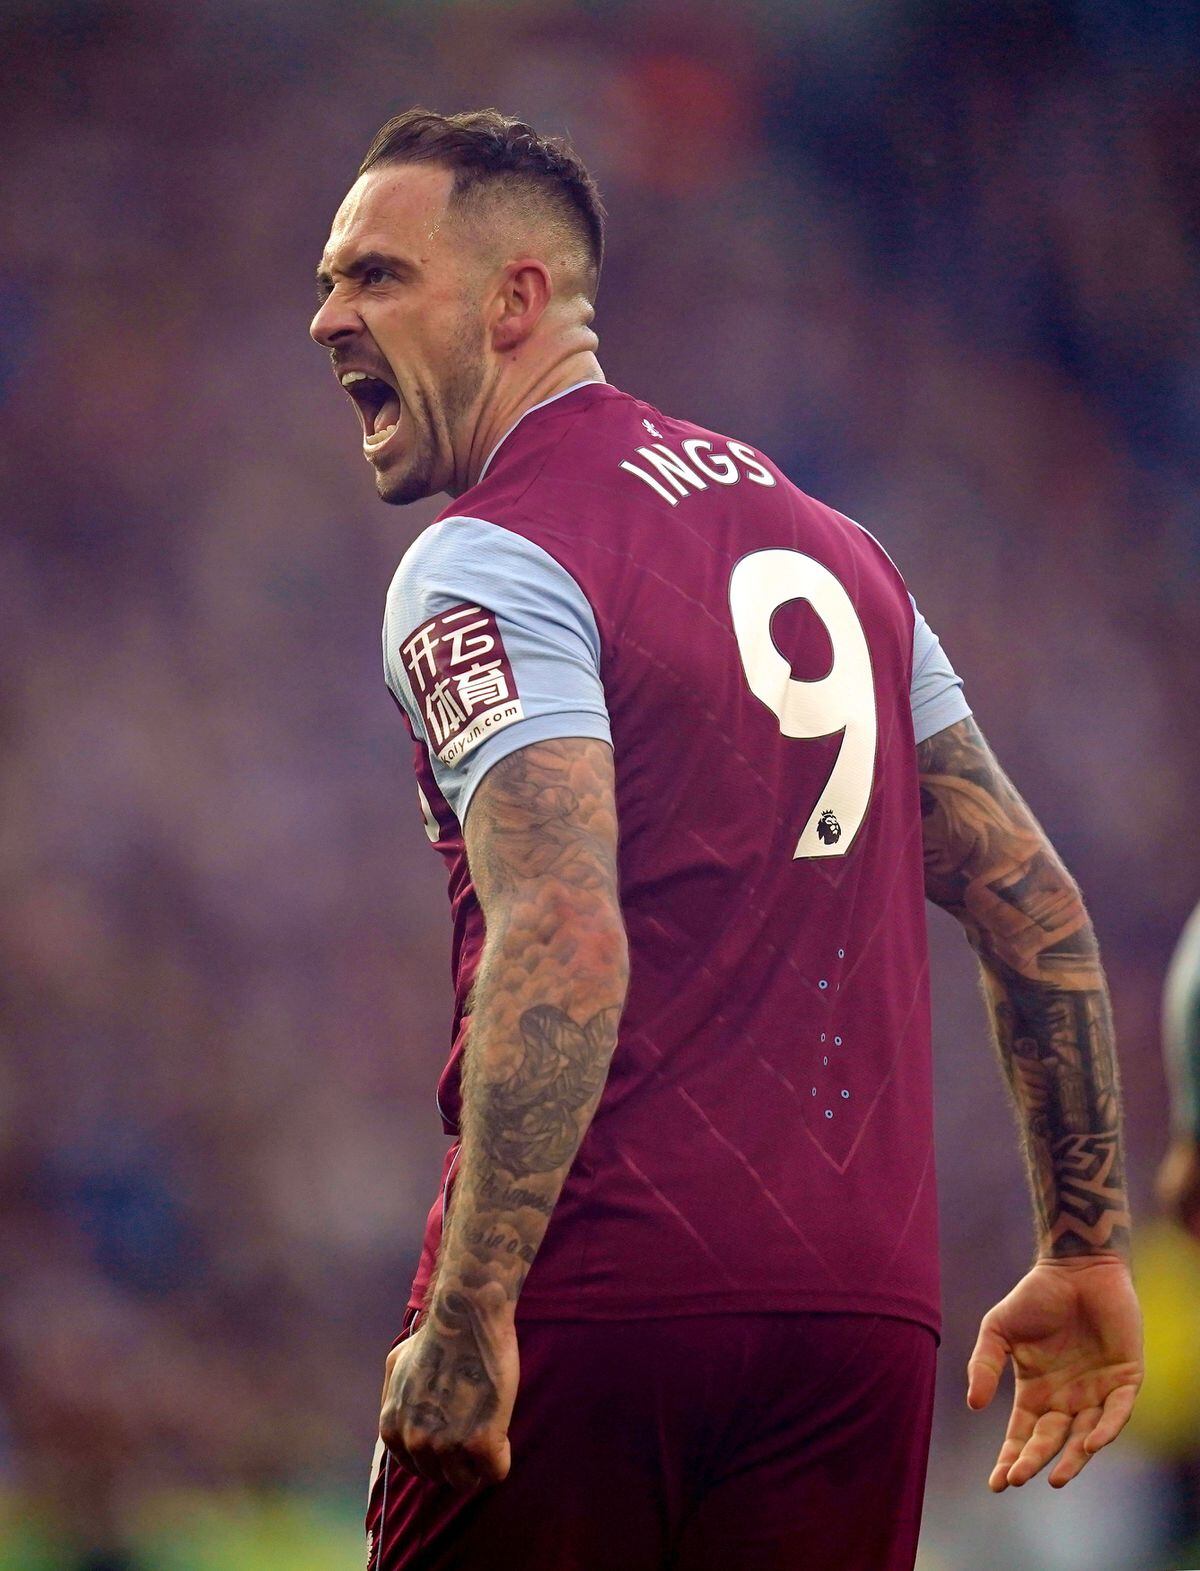 
              
Aston Villa's Danny Ings celebrates scoring their side's second goal of the game  during the Premier League match at the American Express Community Stadium, Brighton. Picture date: Sunday November 13, 2022. PA Photo. See PA story SOCCER Brighton. Photo credit should read: John Walton/PA Wire.


RESTRICTIONS: EDITORIAL USE ONLY No use with unauthorised audio, 
video, data, fixture lists, club/league logos or "live" services. Online in-match use limited to 120 images, no video emulation. No use in betting, games or single club/league/player publications.
            
